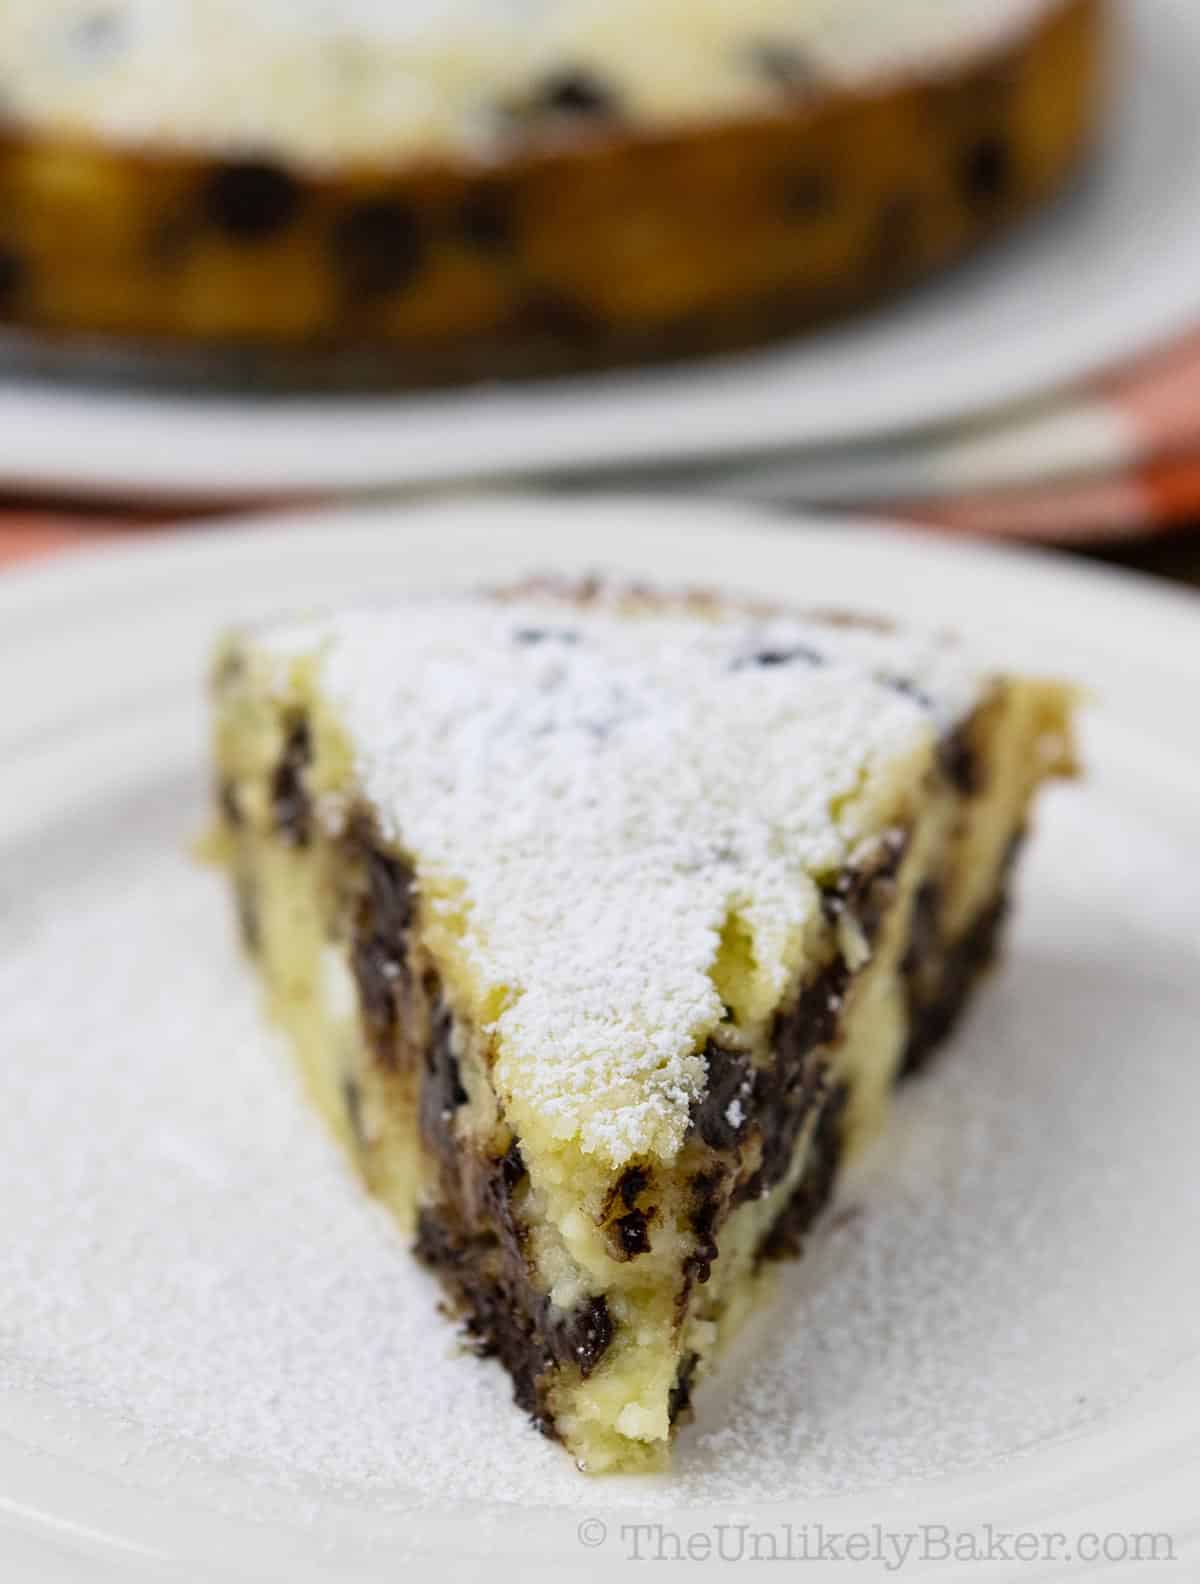 A slice of chocolate chip ricotta cake dusted with powdered sugar.